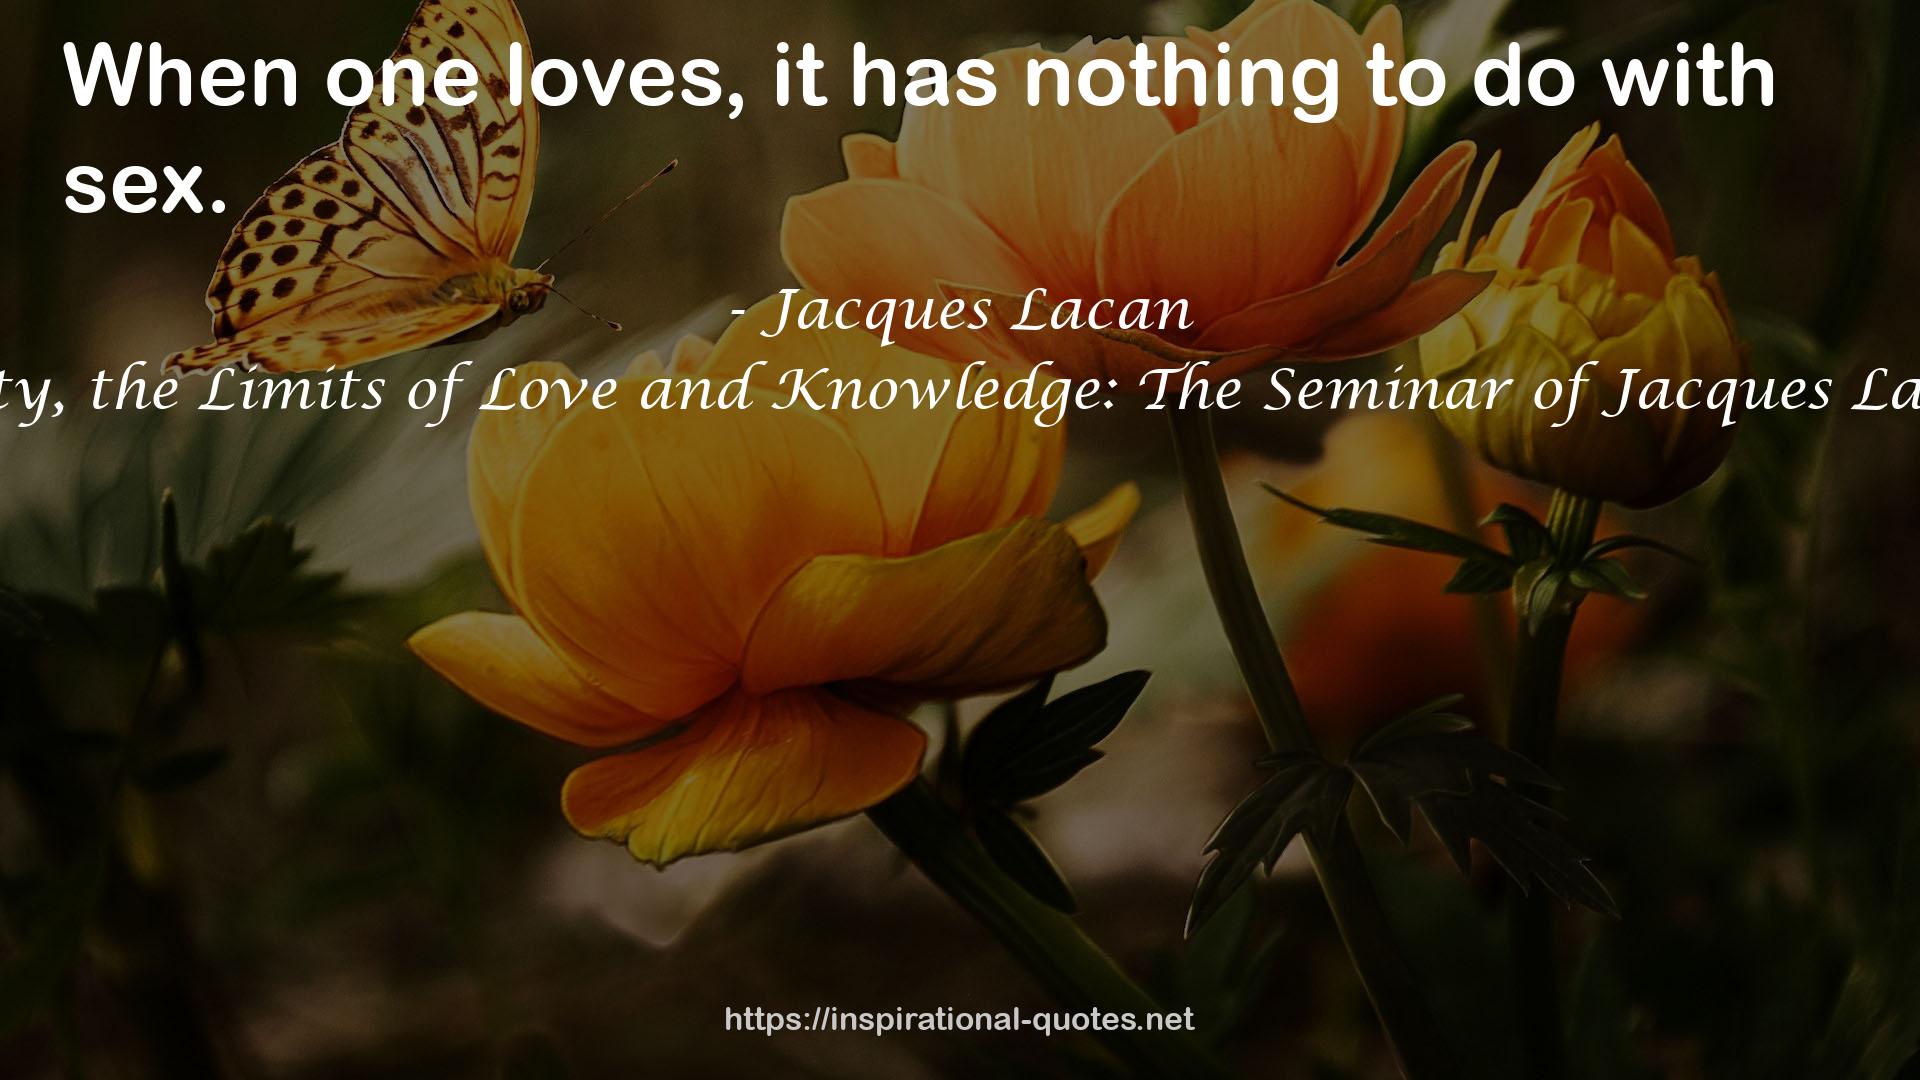 On Feminine Sexuality, the Limits of Love and Knowledge: The Seminar of Jacques Lacan, Book XX: Encore QUOTES